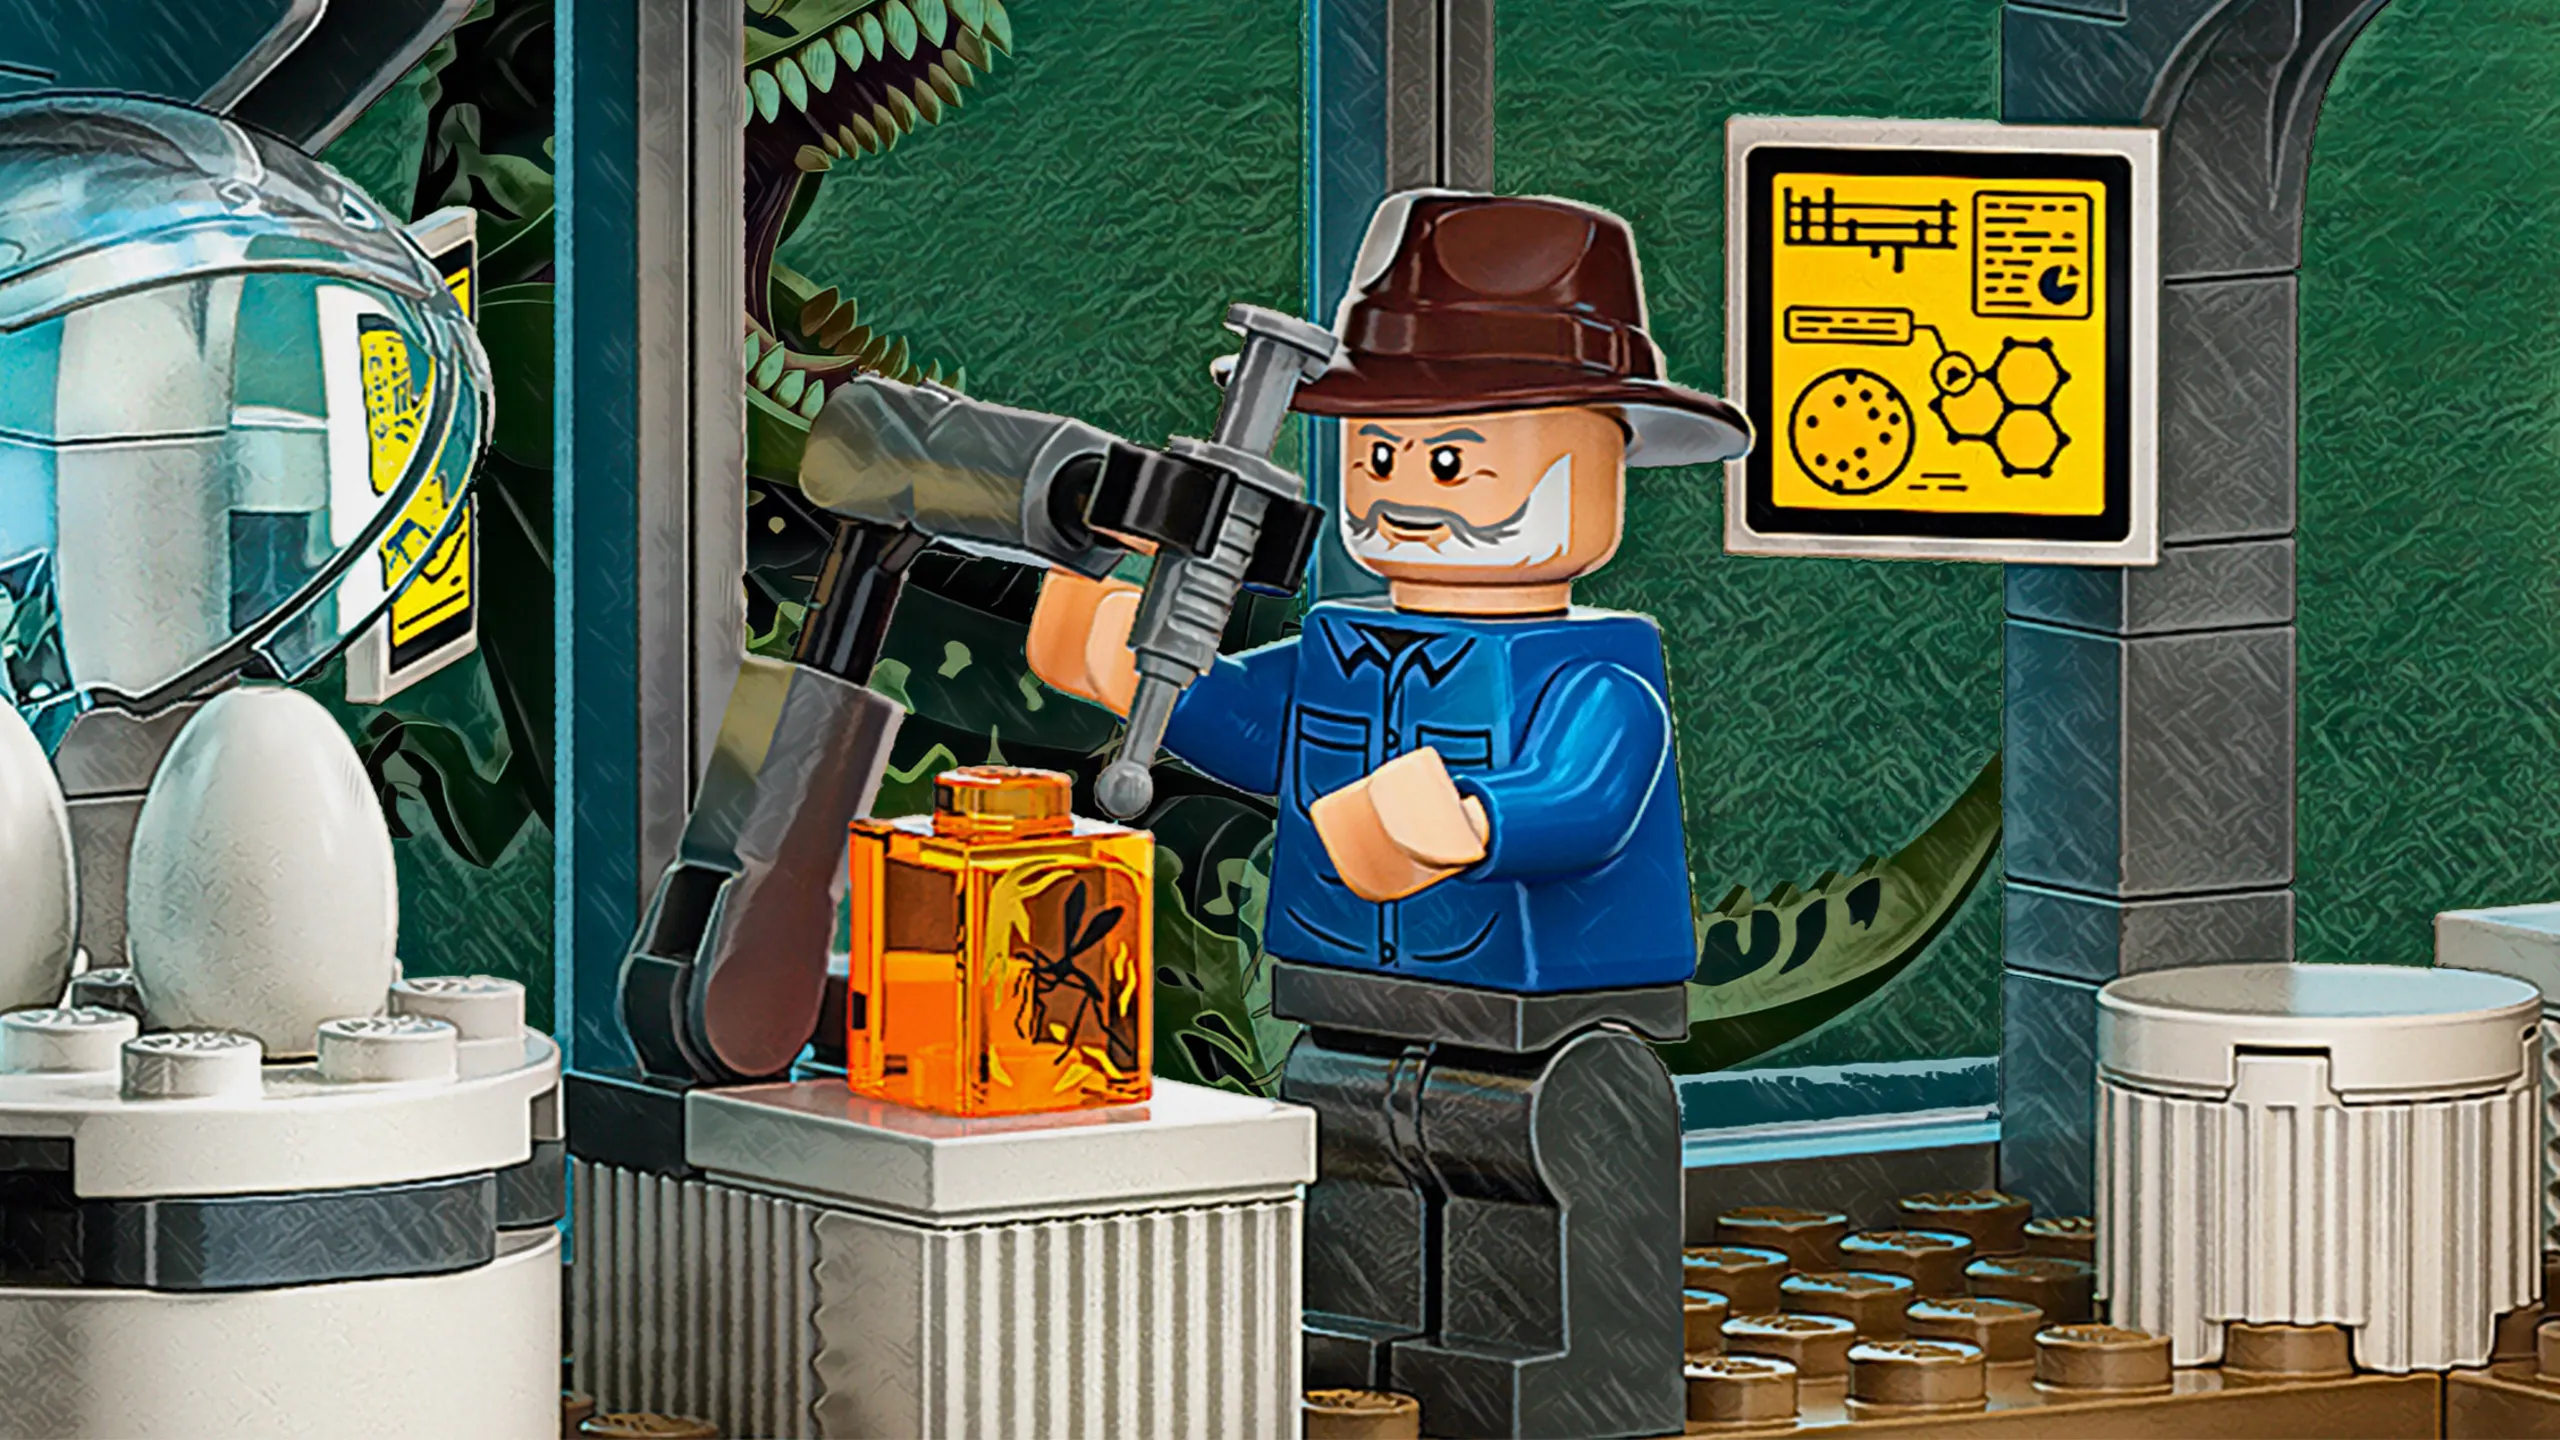 New Lego Jurassic Park Set Contains Giant Pile Of Shit